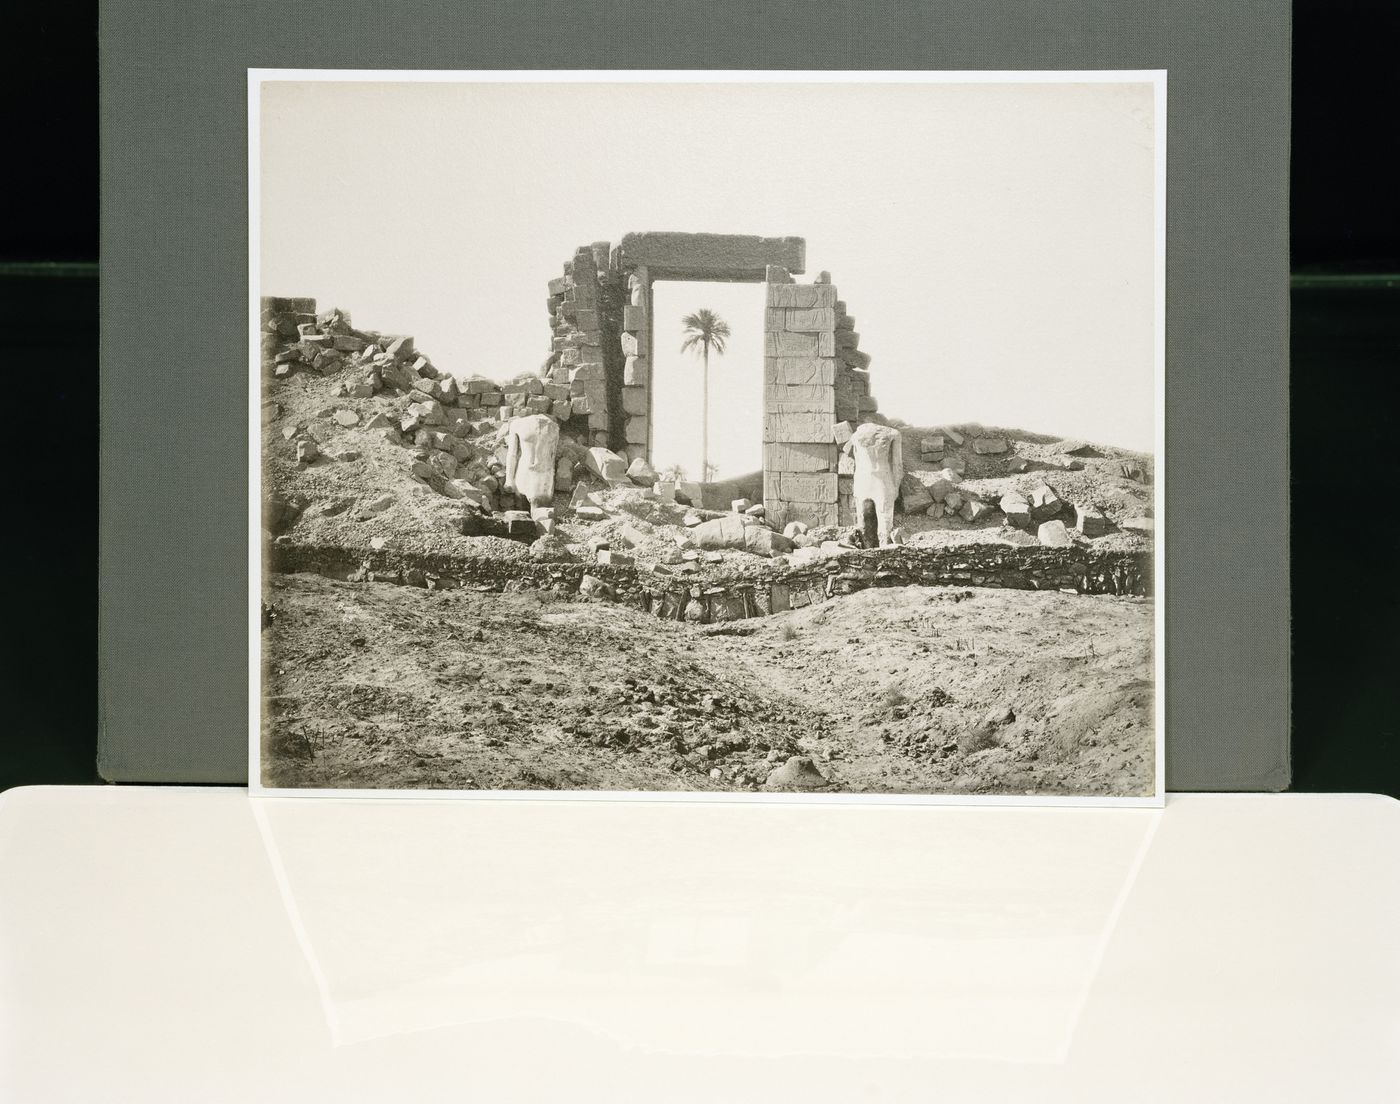 Questioning Pictures: Photograph of the Temple of Rameses, albumen print by Félix Bonfils, ca. 1970